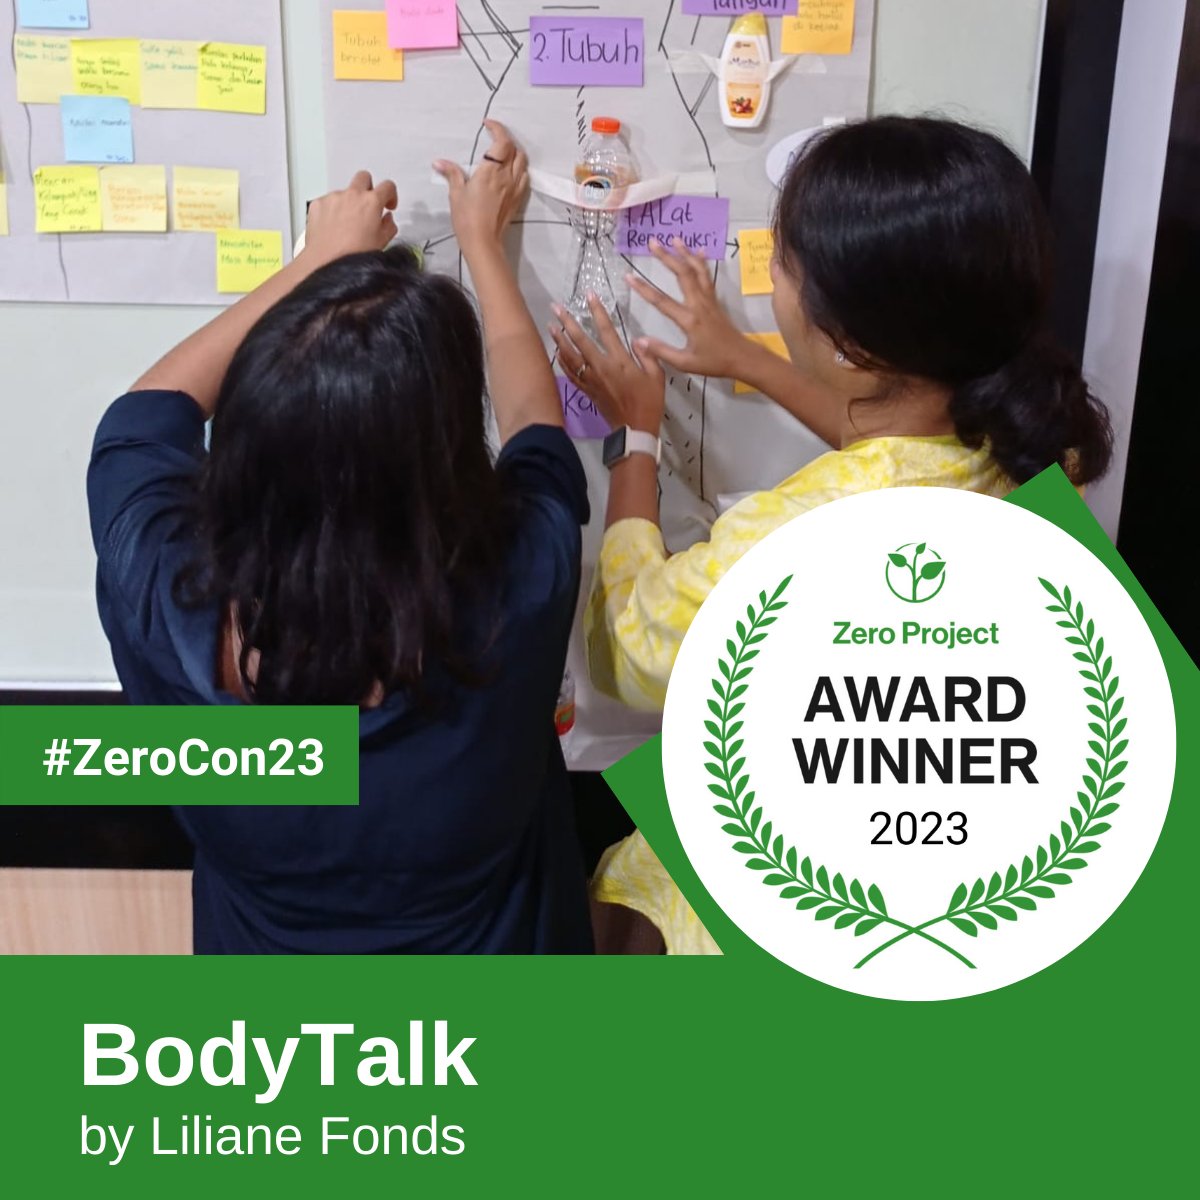 We’re honoured to receive the @ZeroProjectorg 2023 innovative practice award for Body Talk, a program that raises awareness for relationships and sexuality amongst young people with a disability and their community. More information: lilianefonds.org/bodytalk #ZeroCon23